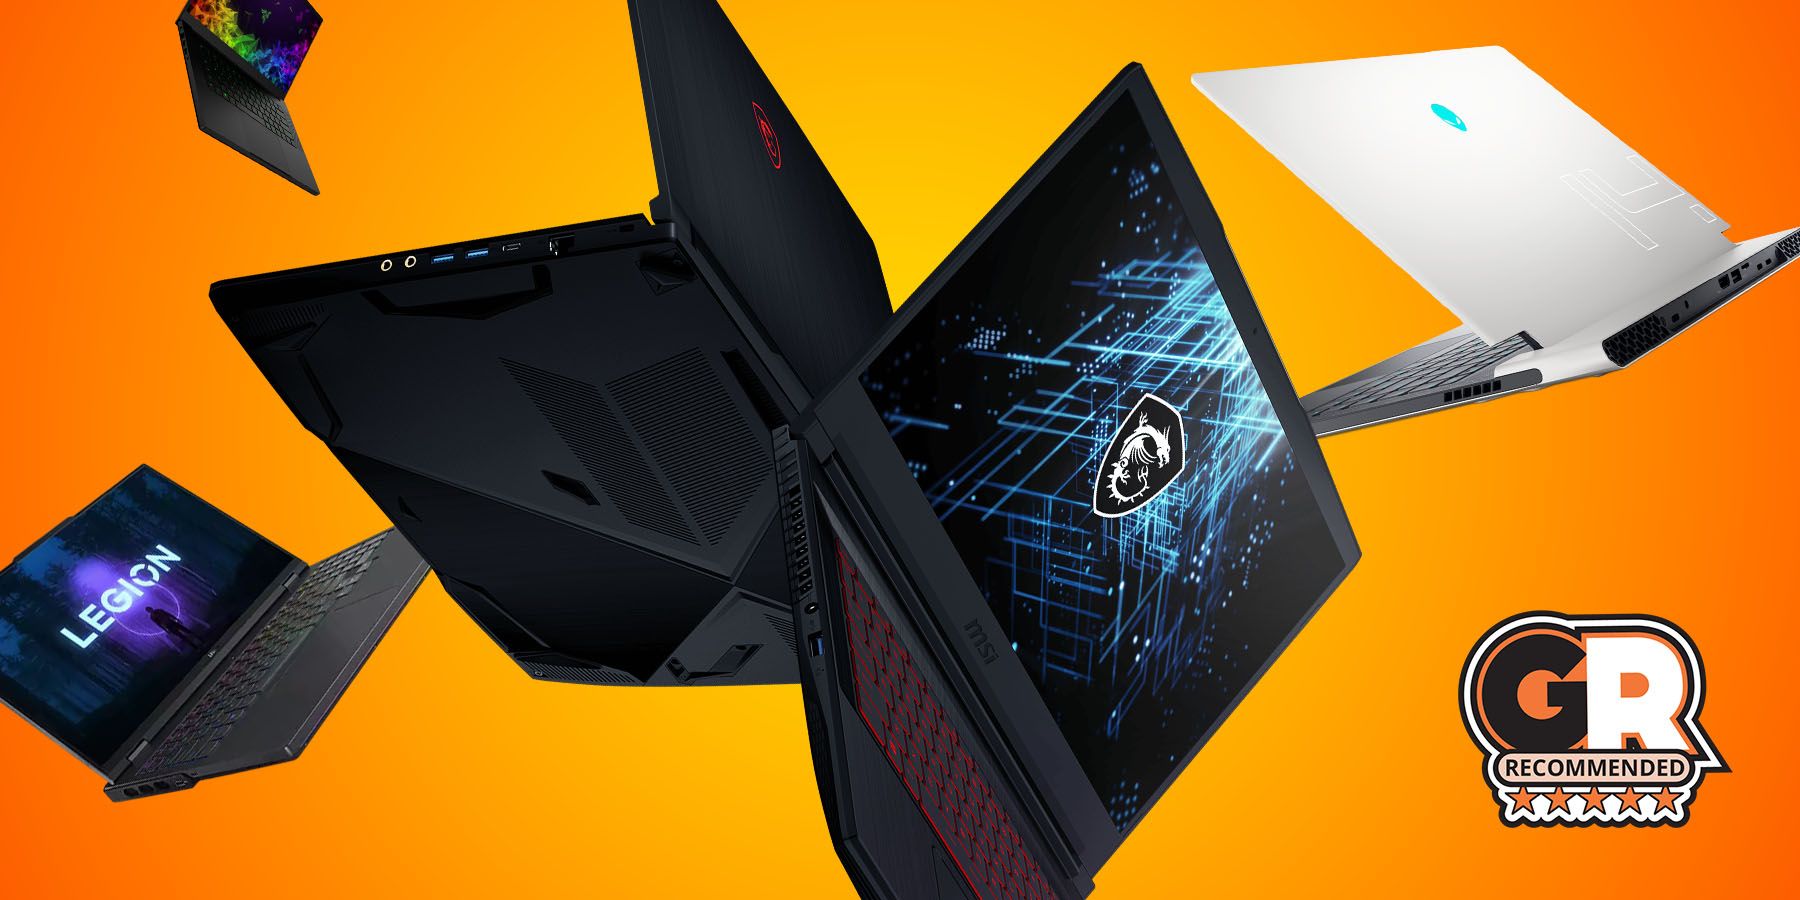 Alienware x14 review: The thinnest 14-inch gaming laptop around